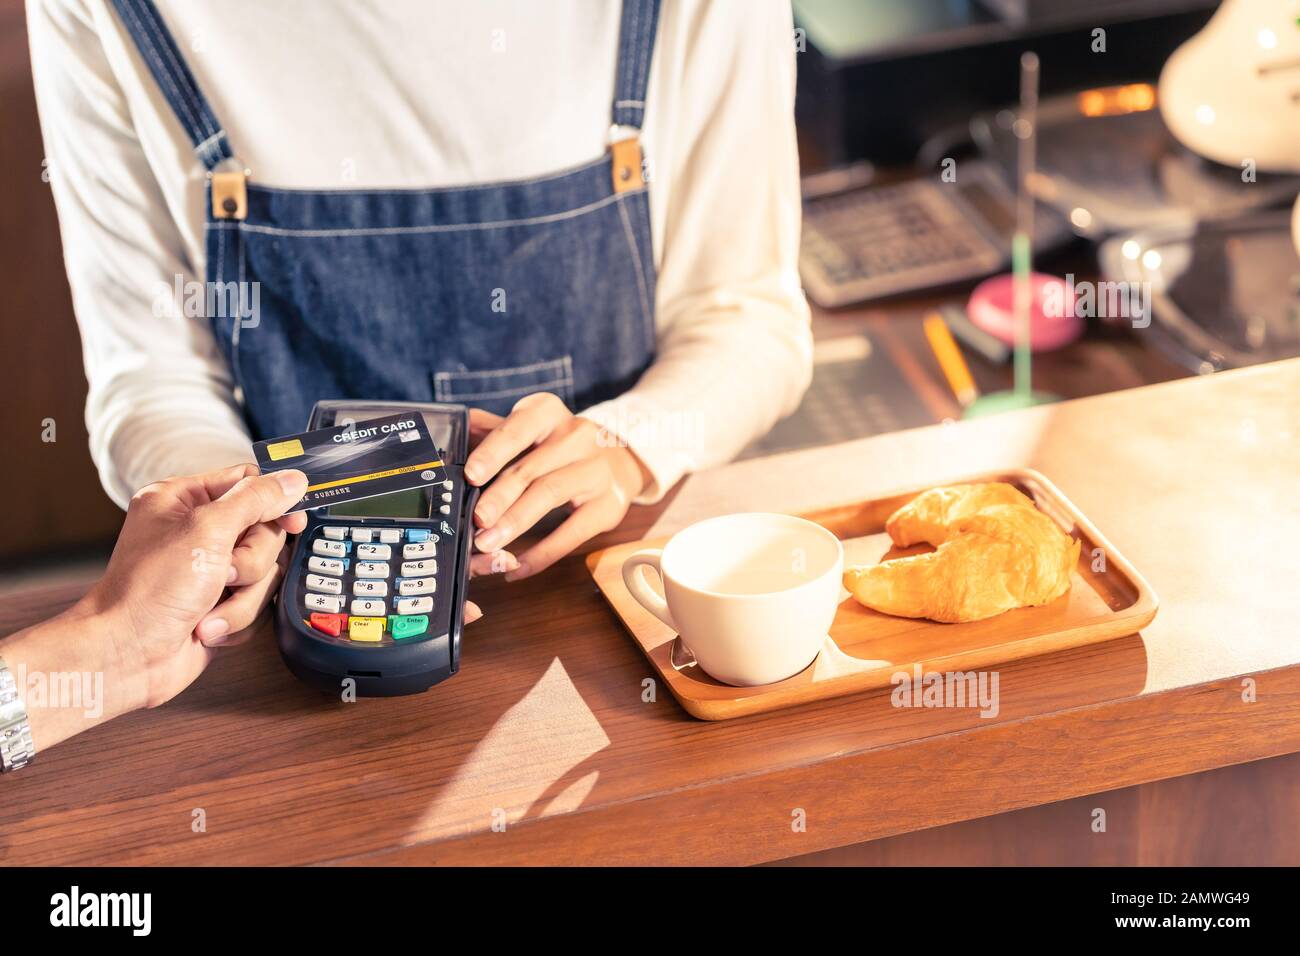 Close-up of asian customer using his credit card with contactless nfs technology to pay a barista for his coffee purchase at a cafe bar. Stock Photo